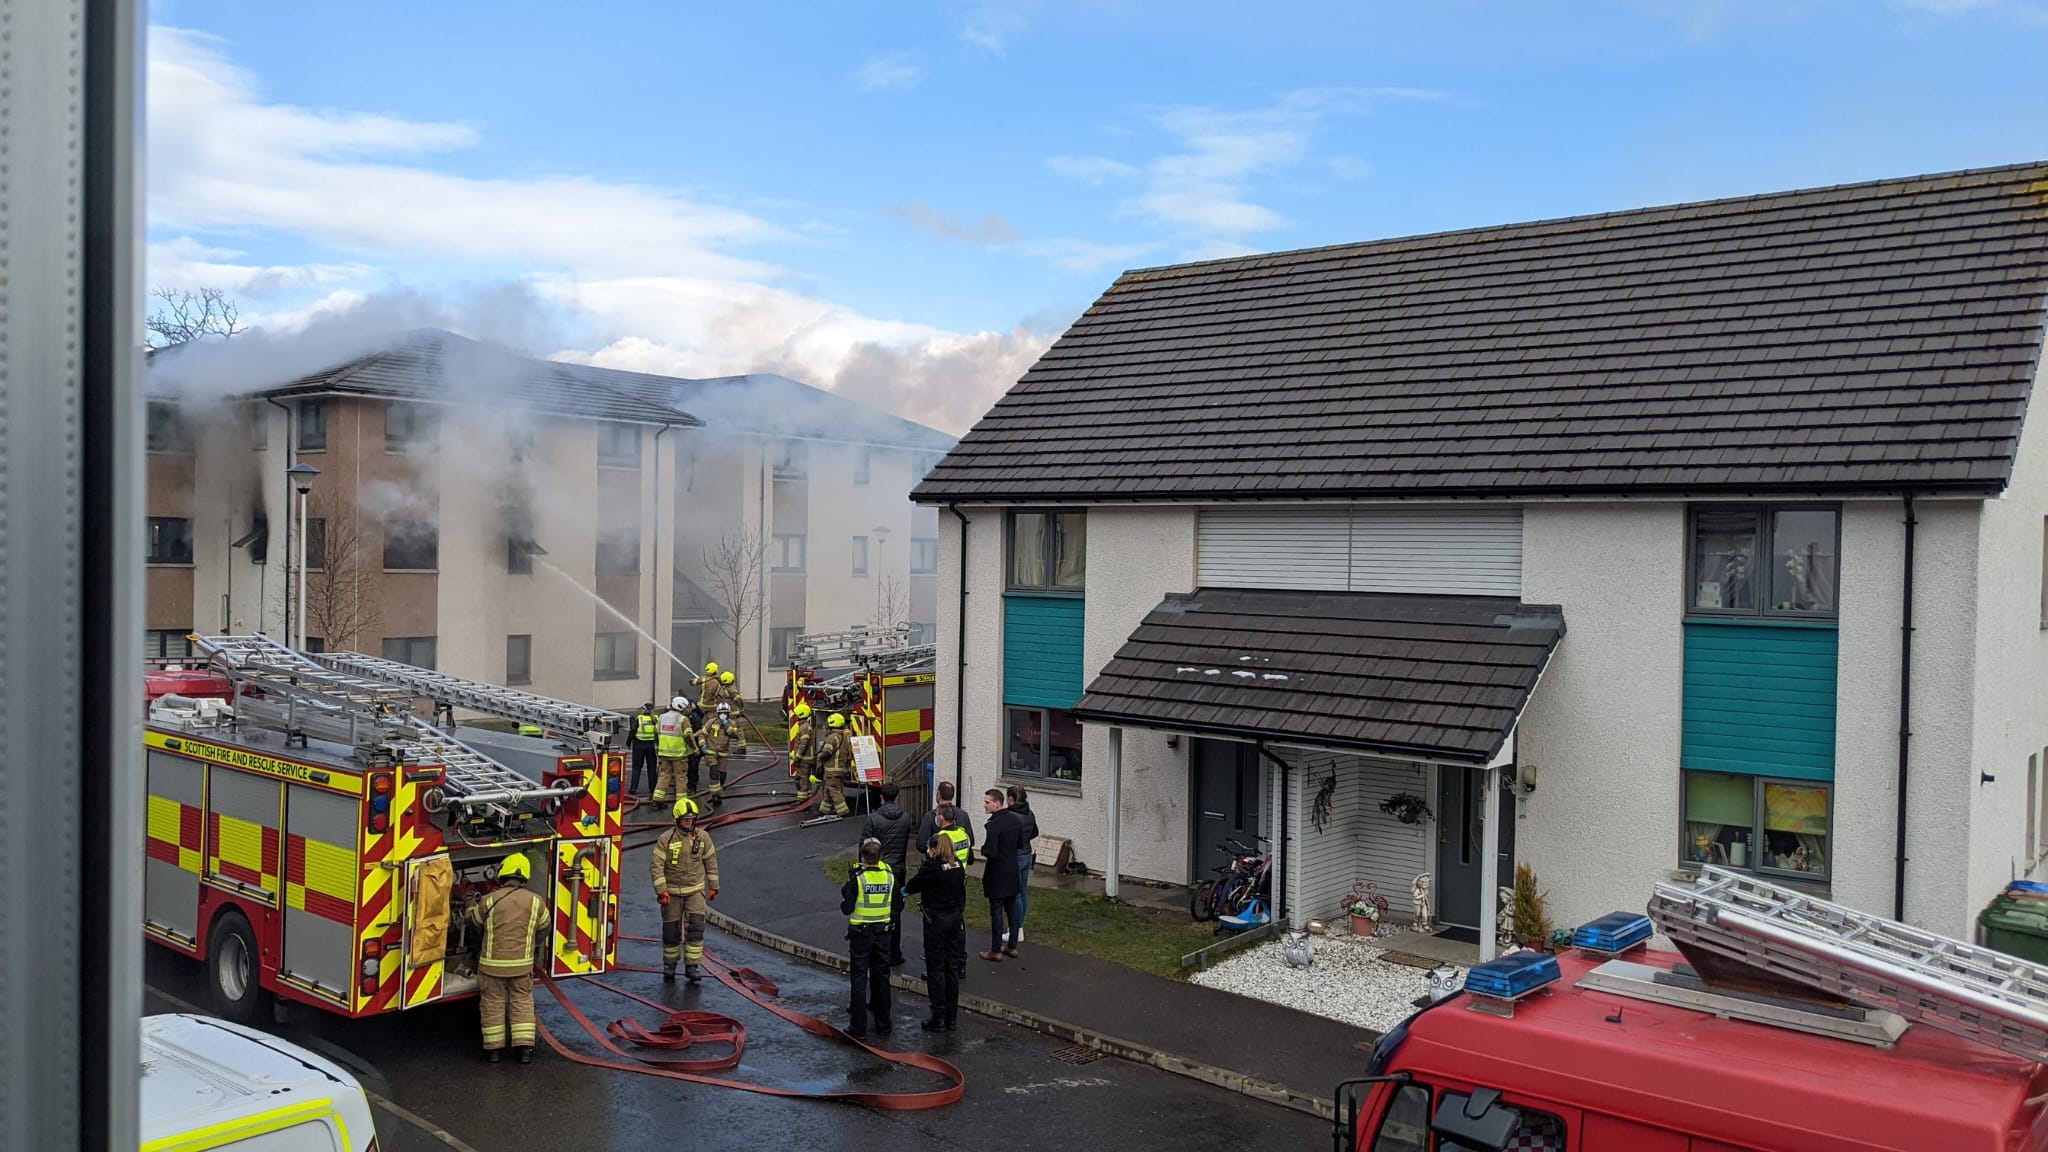 Firefighters tackled the blaze inside a flat on Polvanie View, Inverness.